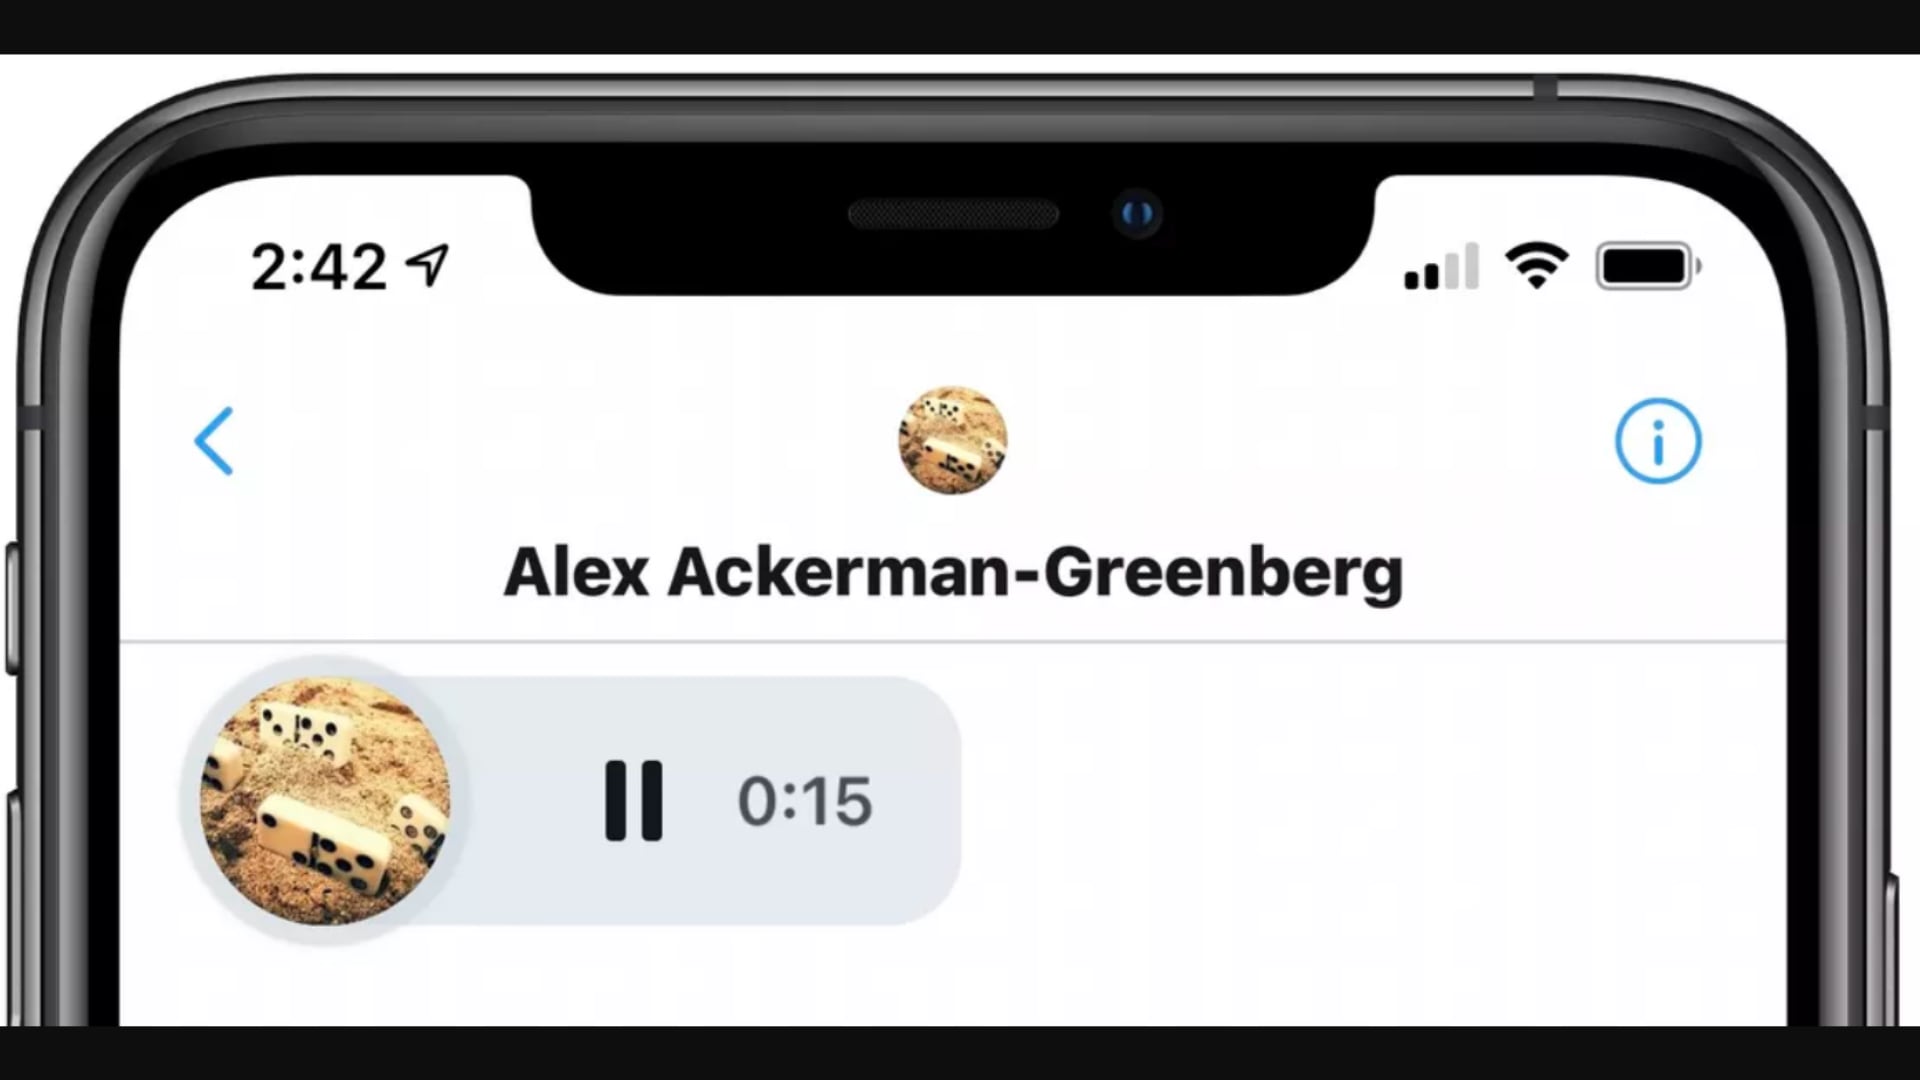 Ackerman-Greenberg’s message mentions that Twitter knows people want more options for how they express themselves in conversations on Twitter both privately and publicly.